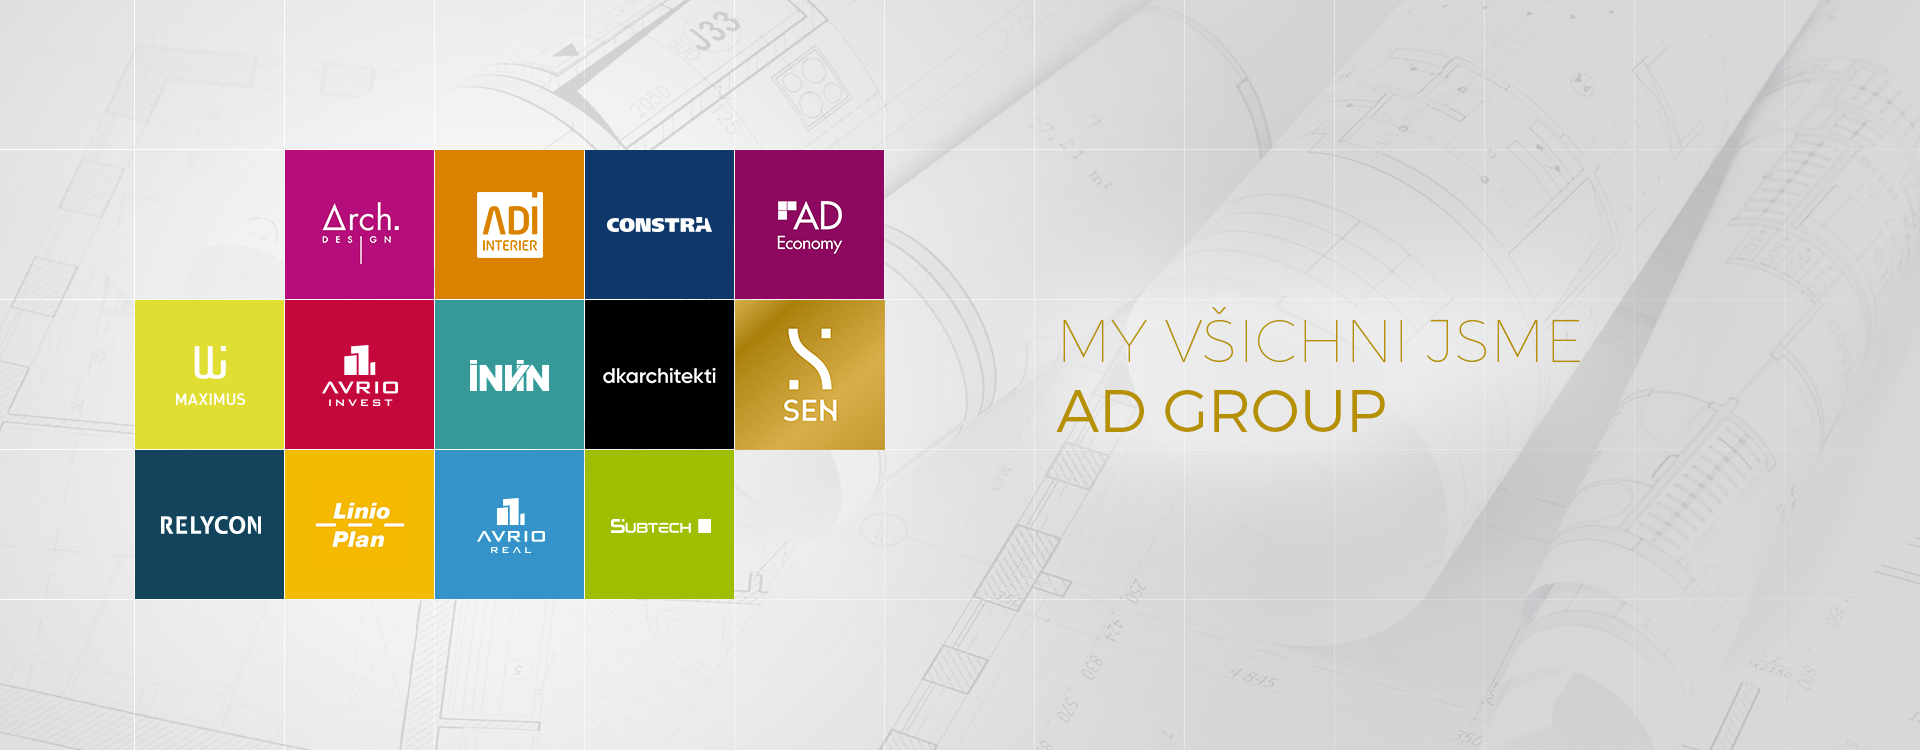 AD GROUP